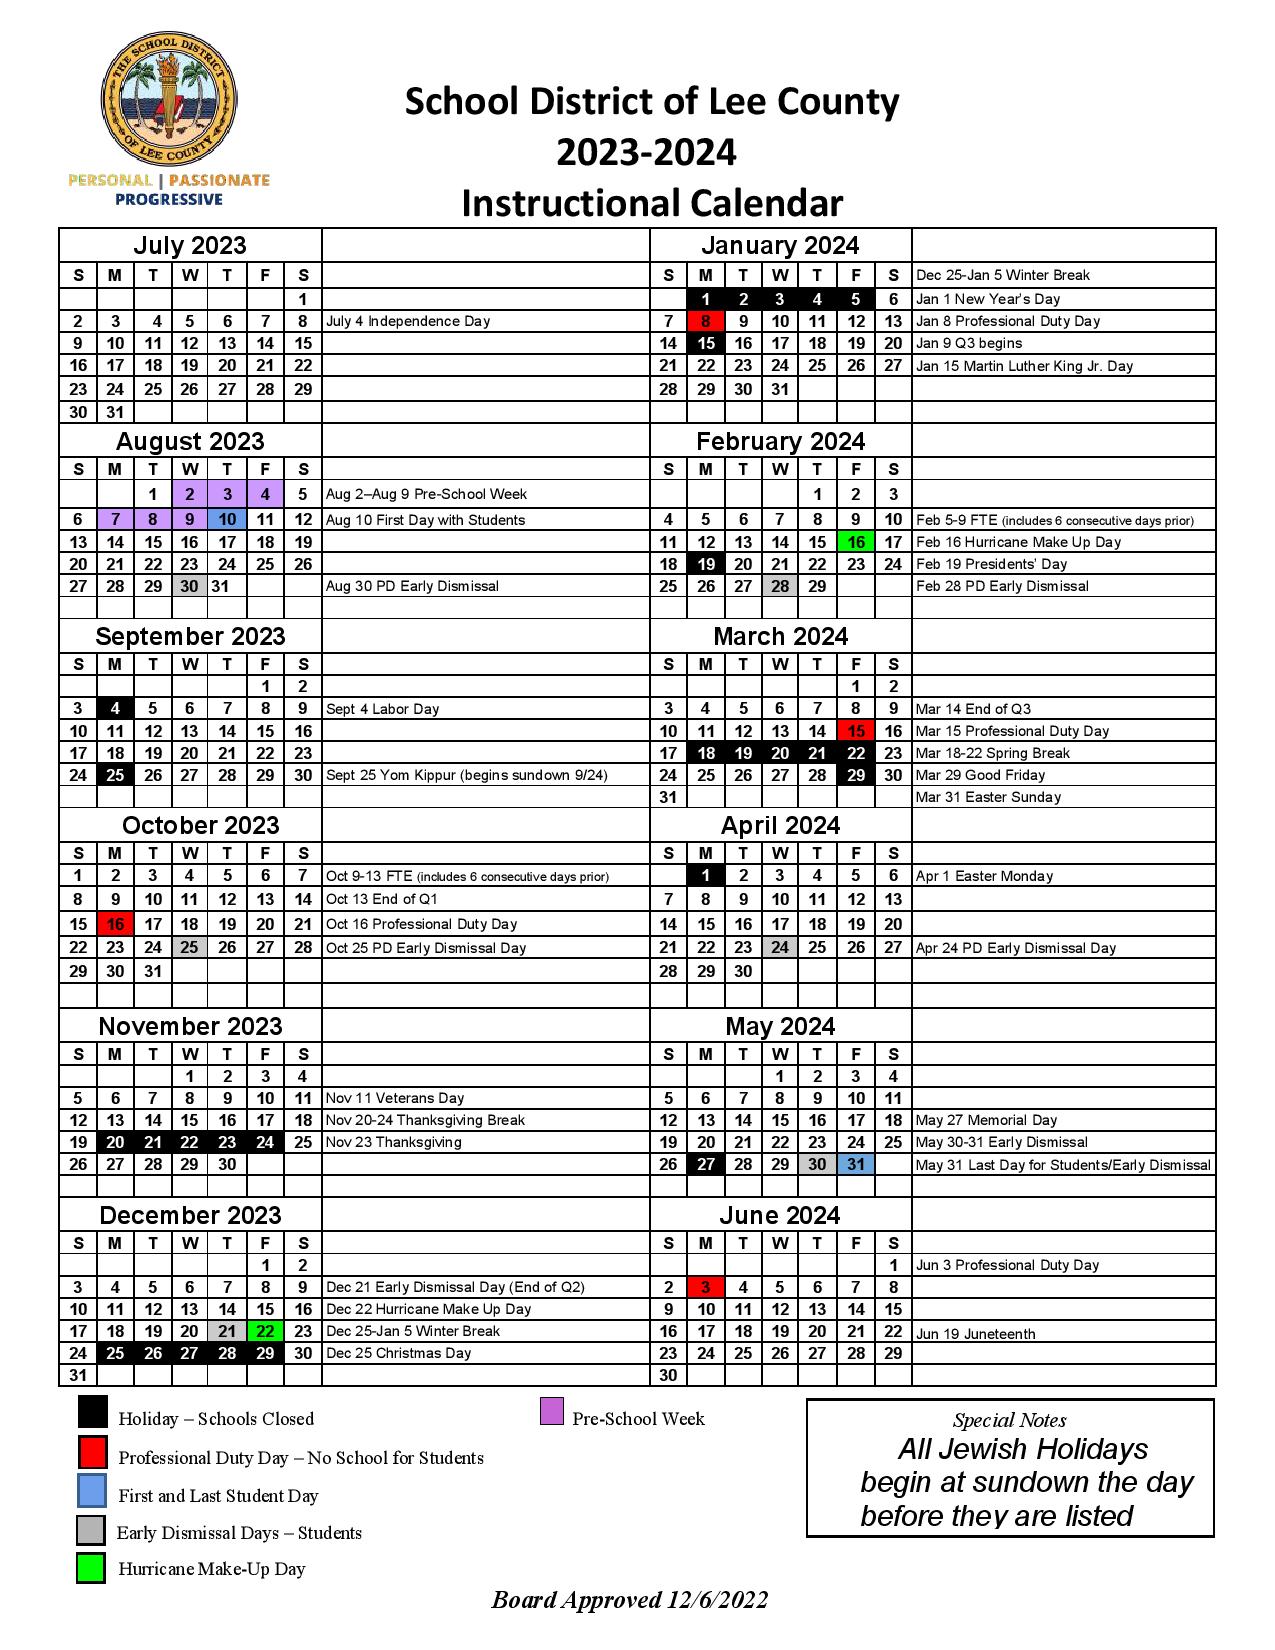 Lee County School District Calendar 2023-2024 with Holidays